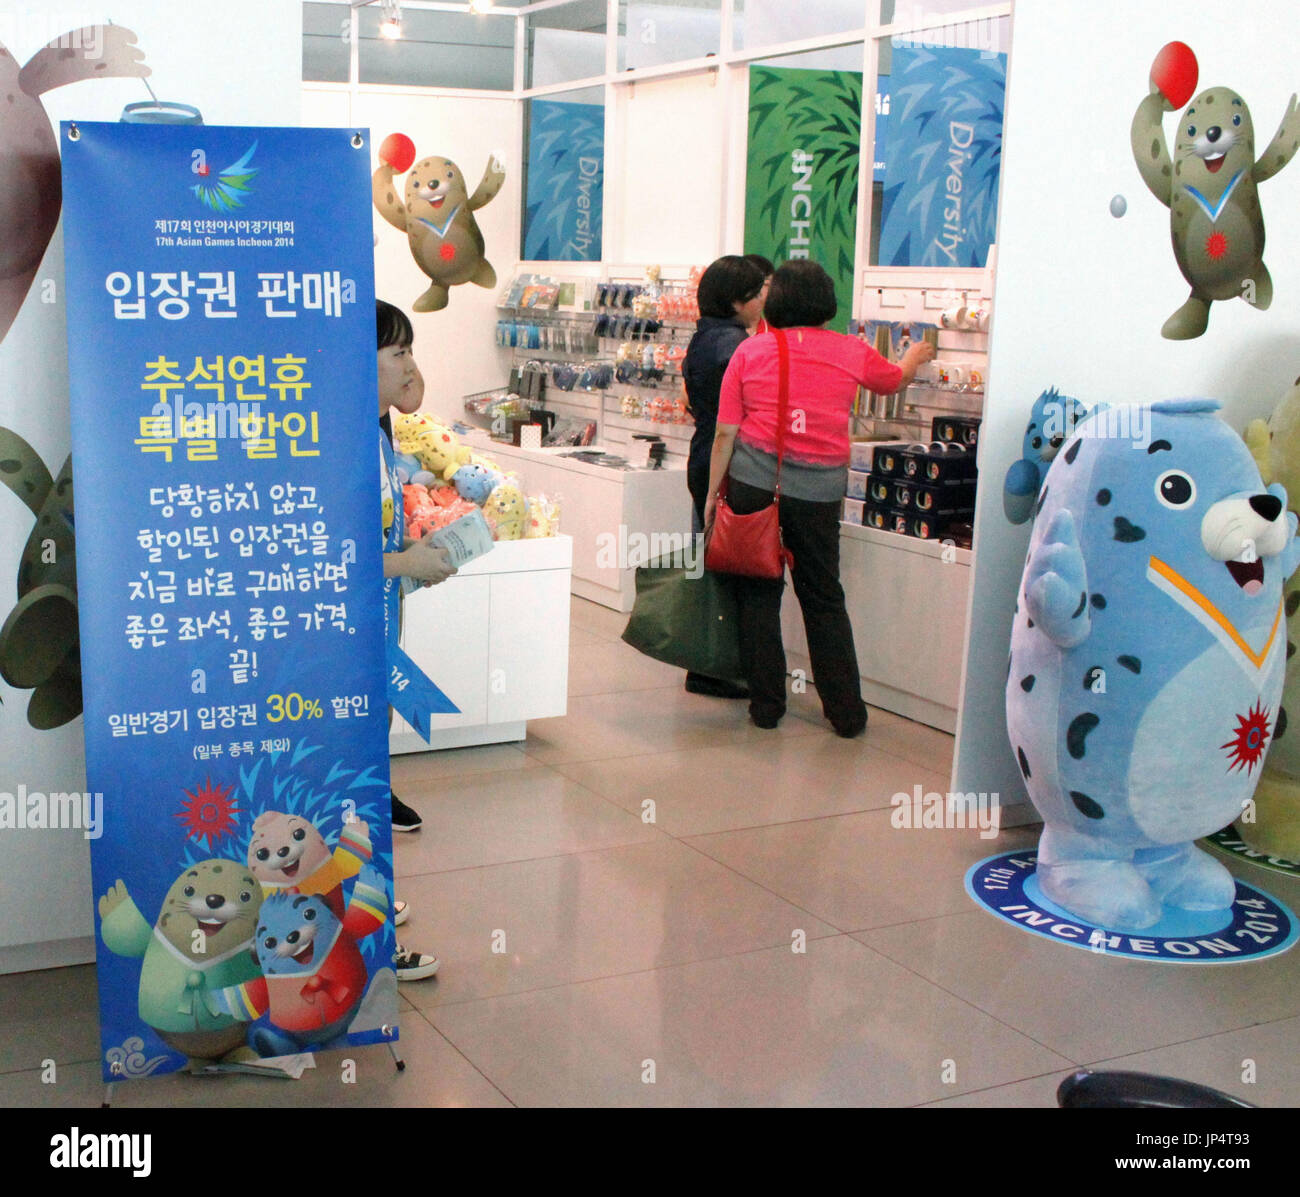 INCHEON, South Korea - The sales floor selling various goods related to the Incheon Asian Games opening Sept. 19, 2014, opens at Incheon International Airport in South Korea on Sept. 6, with a signboard on the left announcing a 30 percent discount on tickets for the games. (Kyodo) Stock Photo